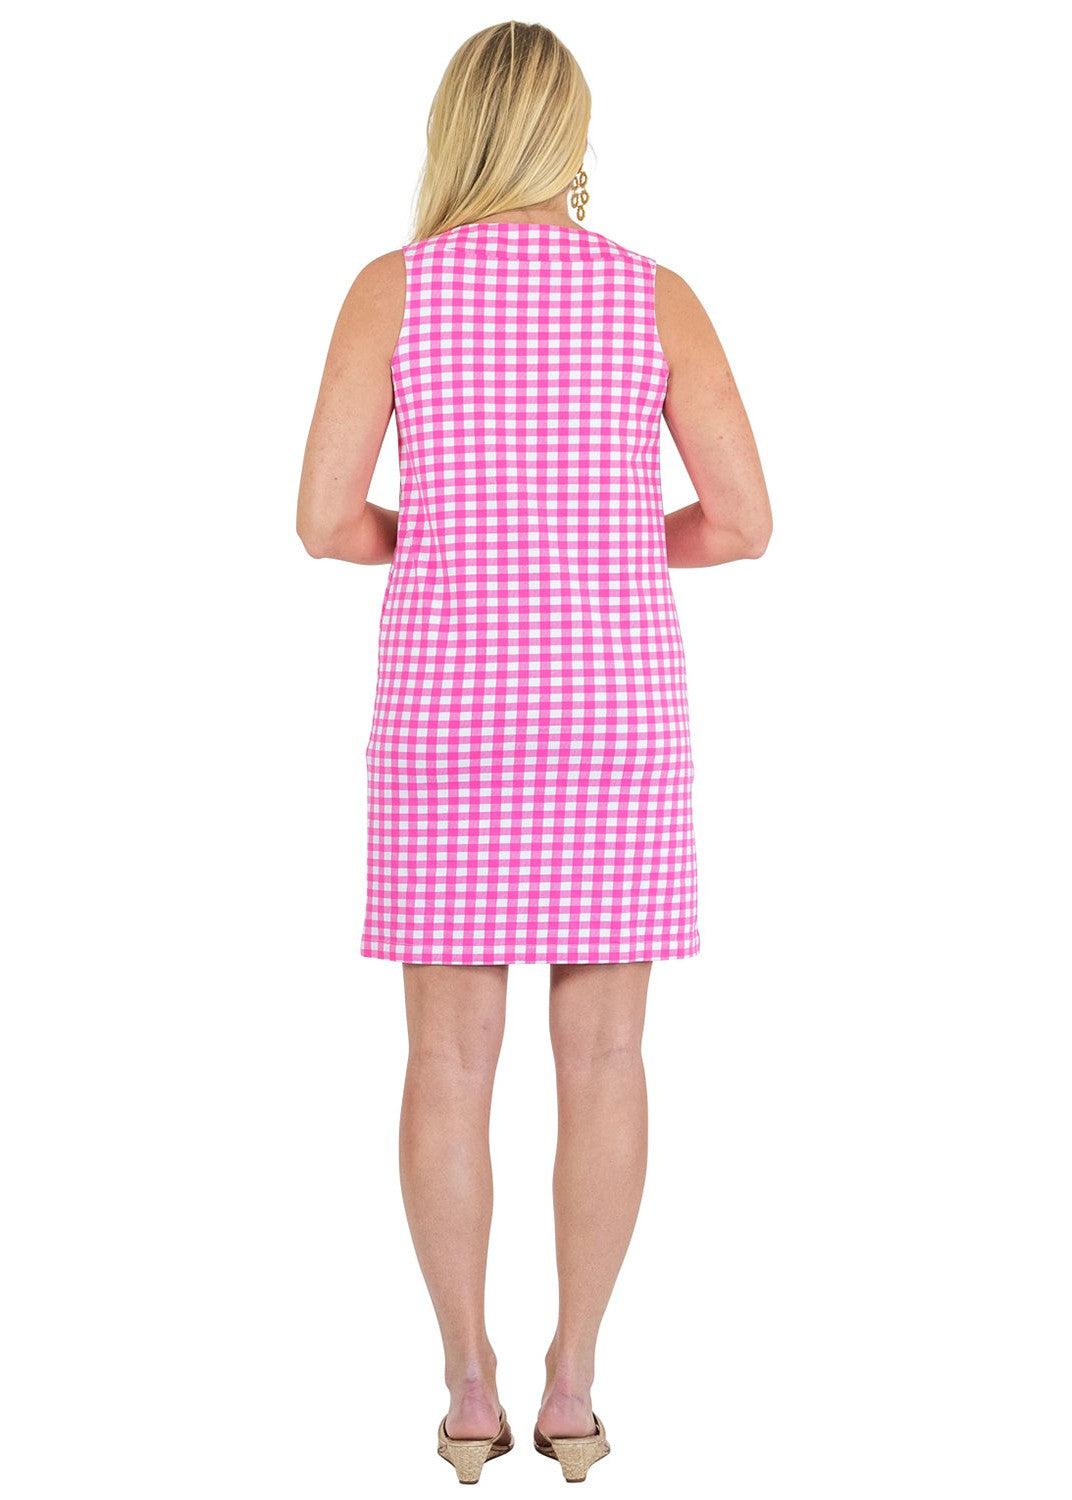 Yacht Club Shift- Gingham Check Pink/White - FINAL SALE-2